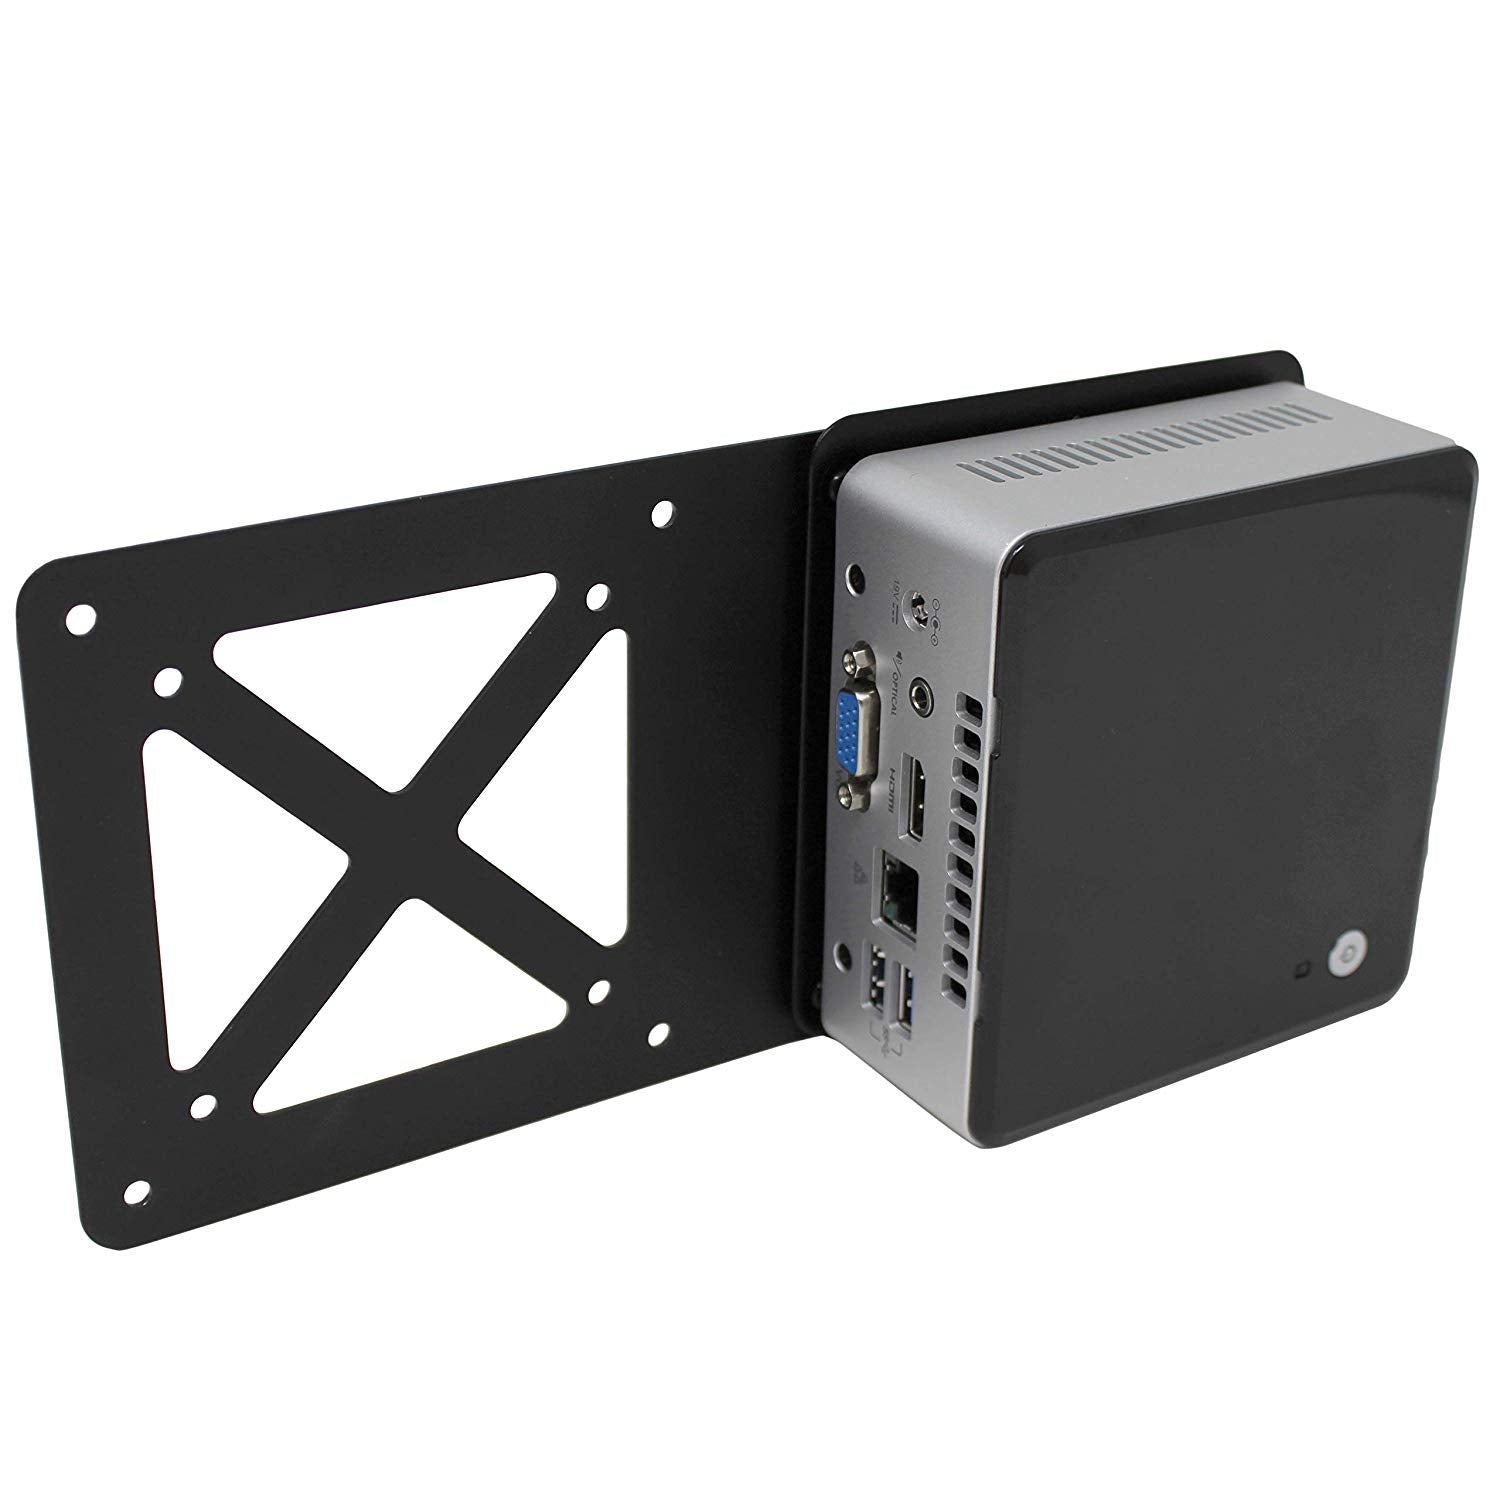 VESA Mount Adapter Plate for NUC – HumanCentric